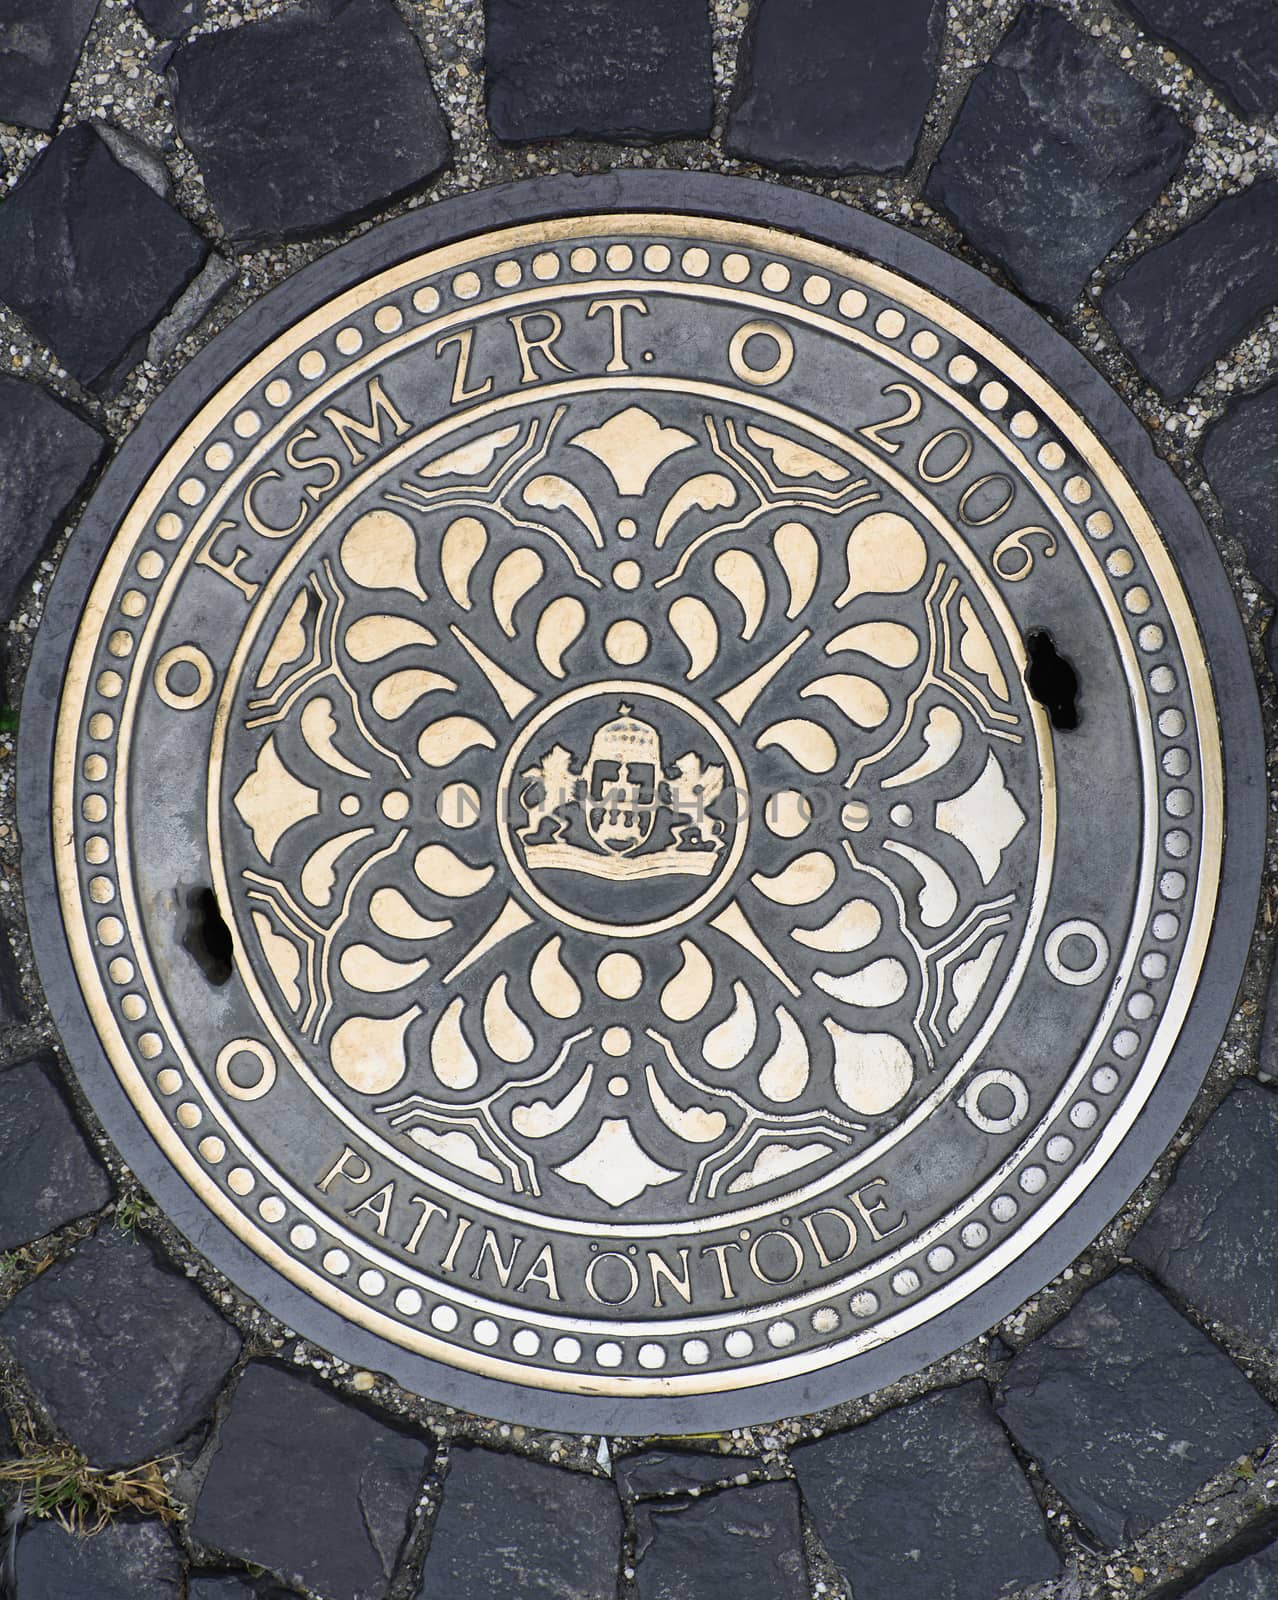 Manhole cover in Budapest by Irene1601